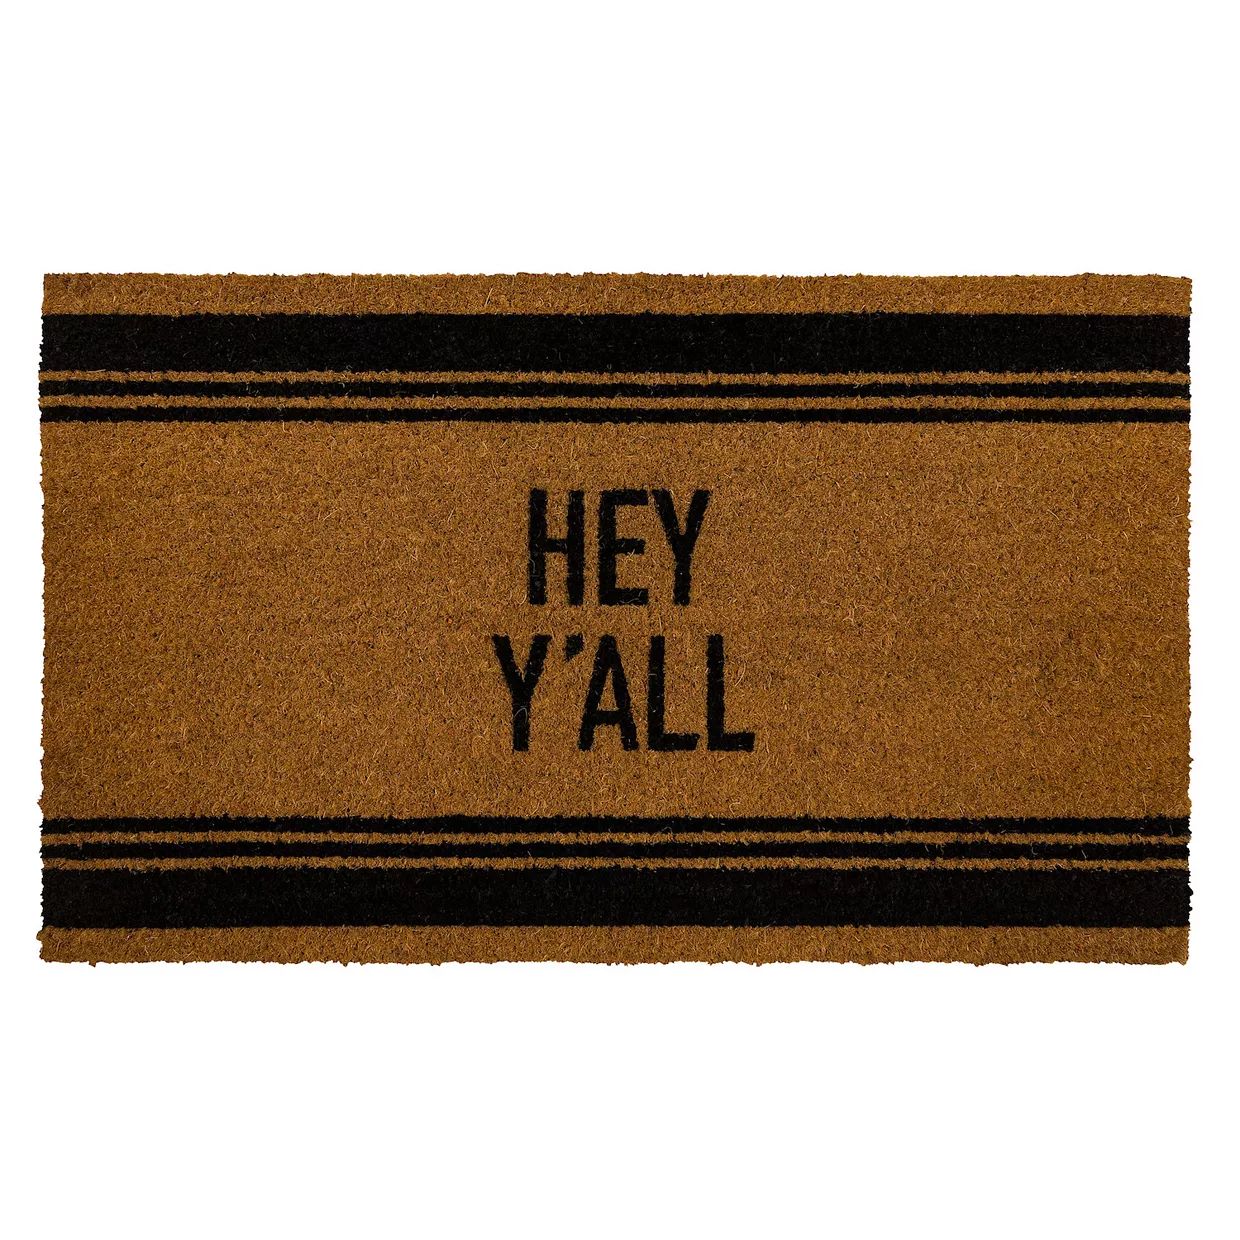 Sonoma Goods For Life® Hey Y'All Coir Doormat - 18'' x 30'' | Kohl's